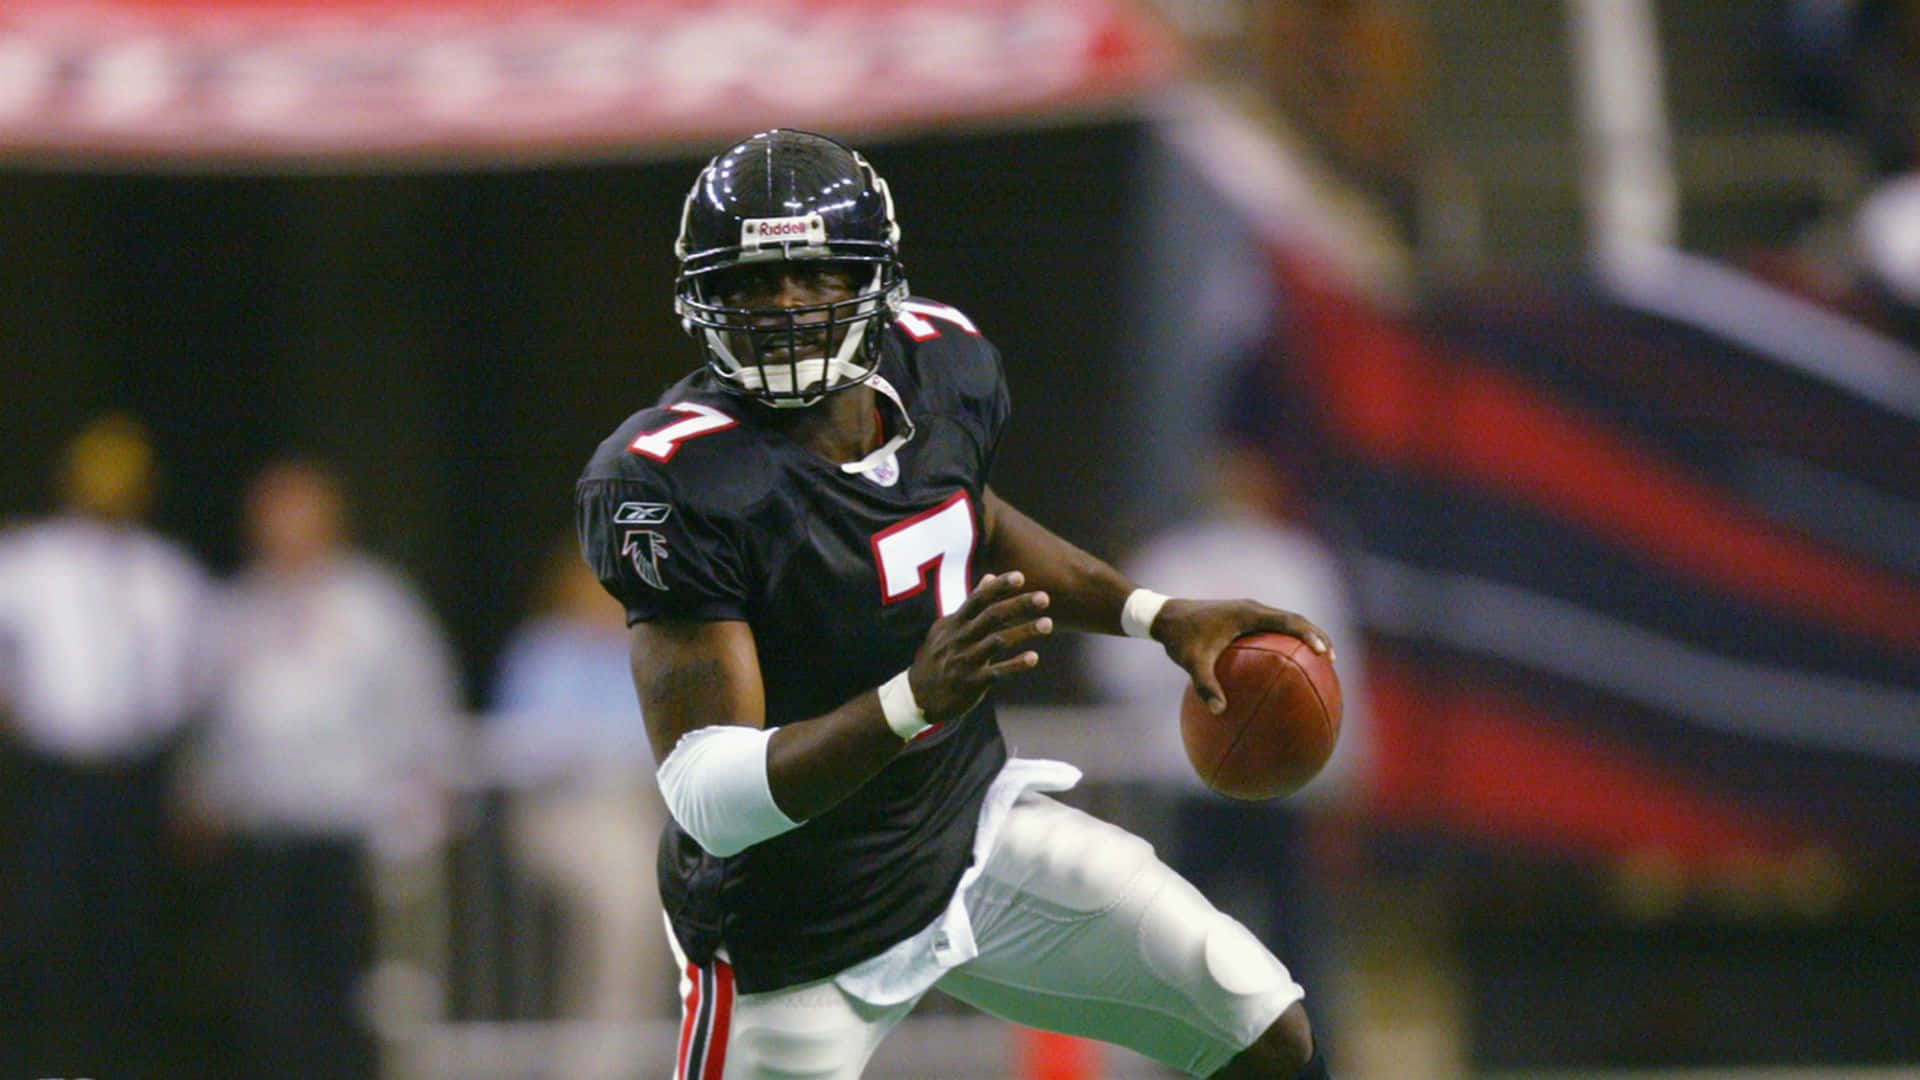 Michael Vick enjoying life after a successful career in the NFL. Wallpaper